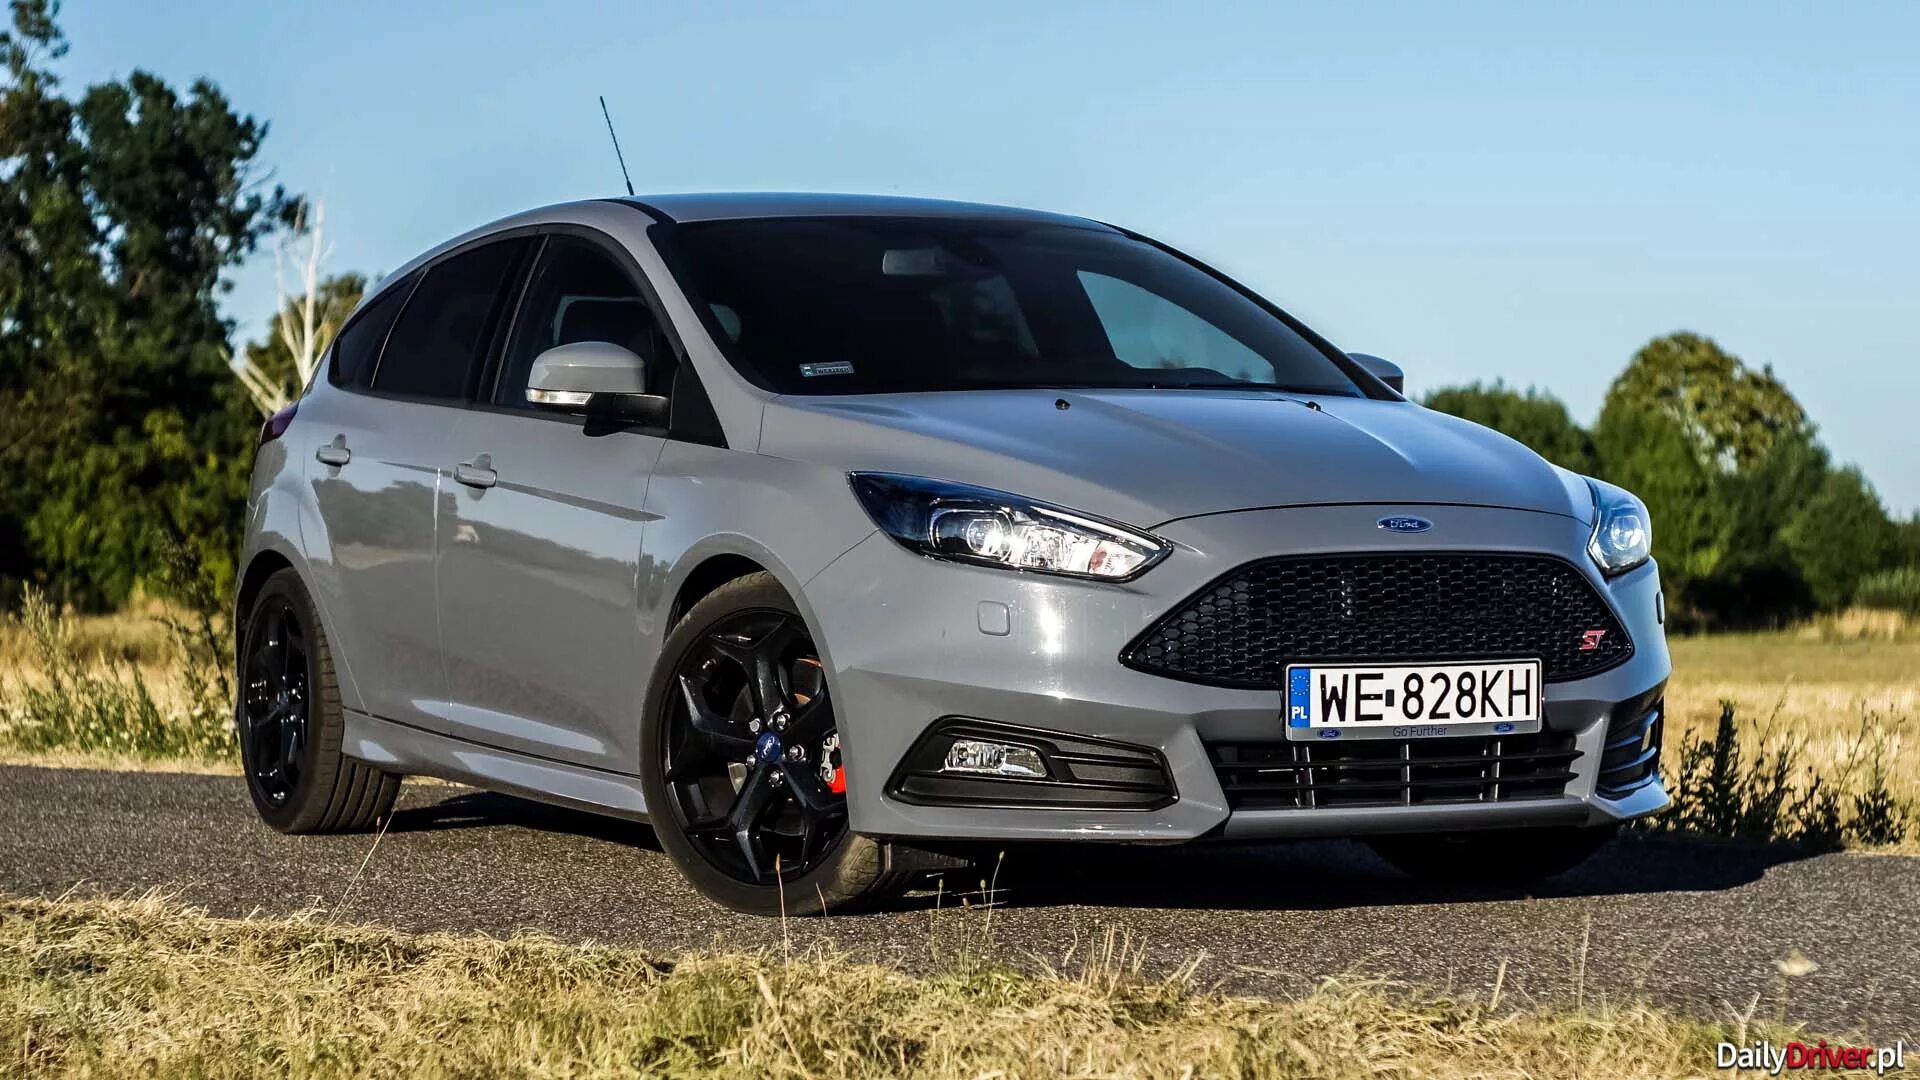 Ford Focus mk3 St-line. Ford Focus 3 Restyling St. Ford Focus St mk3. Ford Focus 2015 хэтчбек. Форд фокус 3 количество